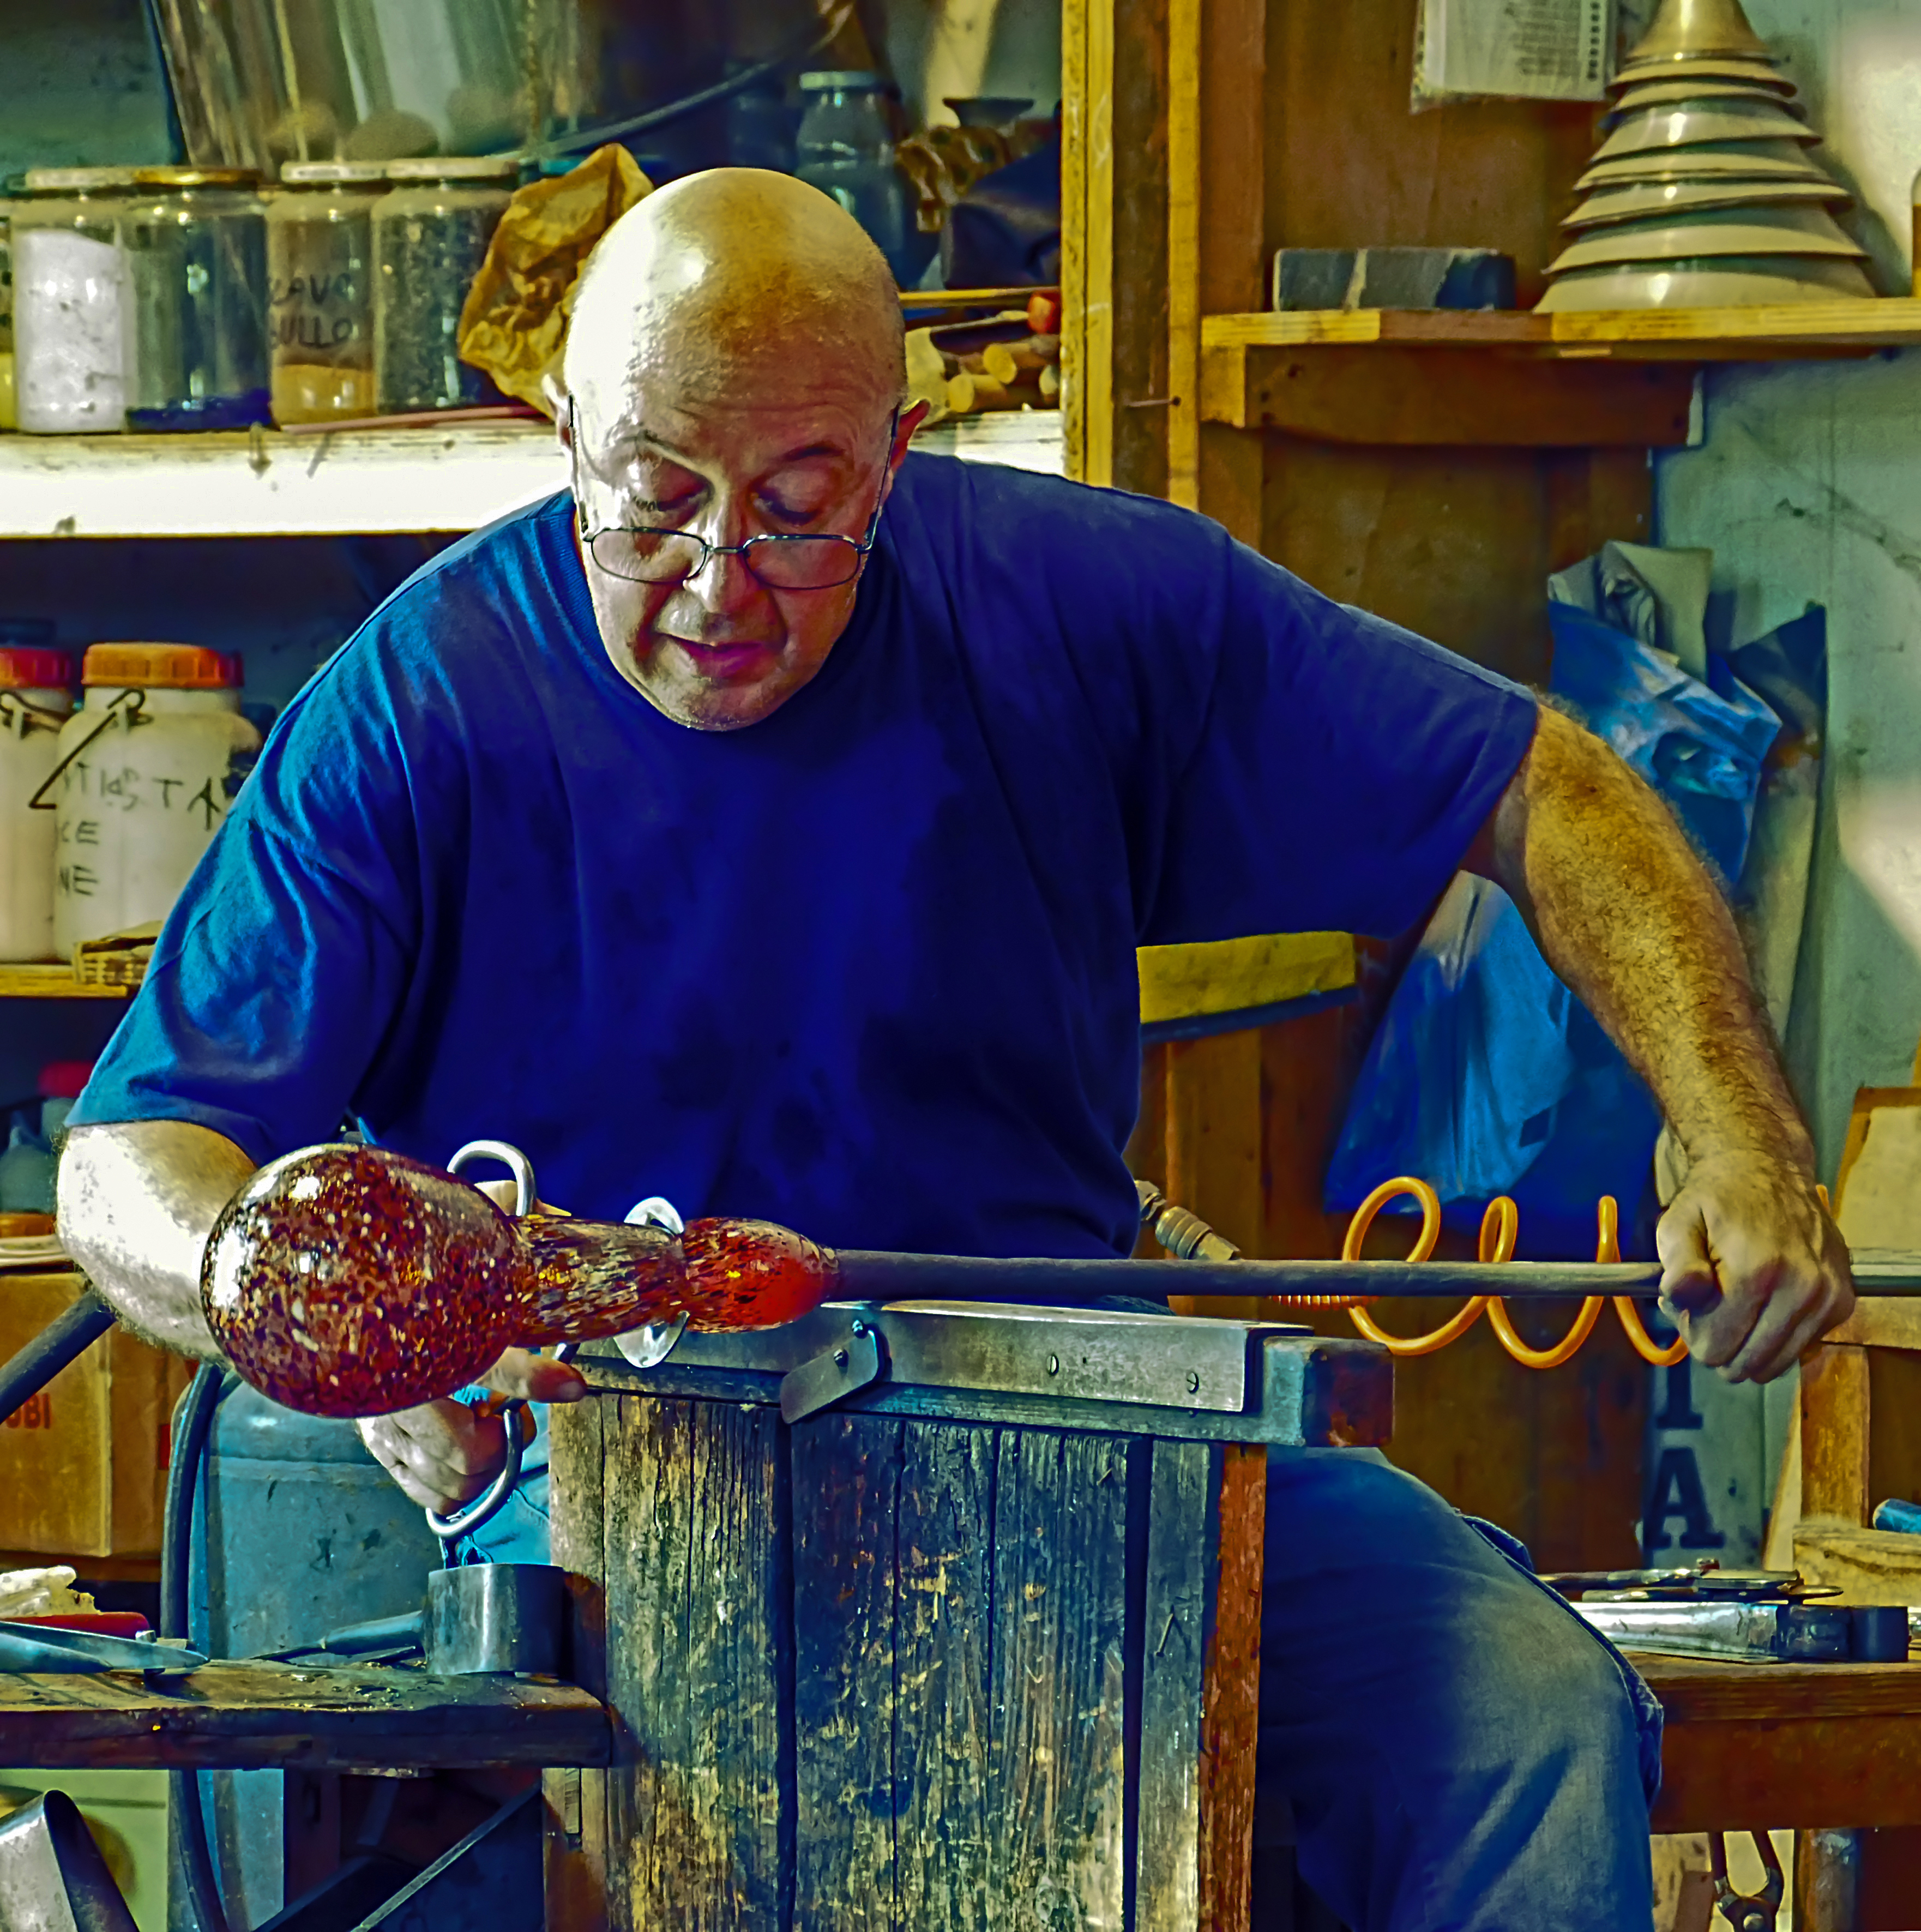 Experience These Amazing Things to Do in Europe During Family Vacations - Glassblowing Demonstration at the Murano Glass Factory